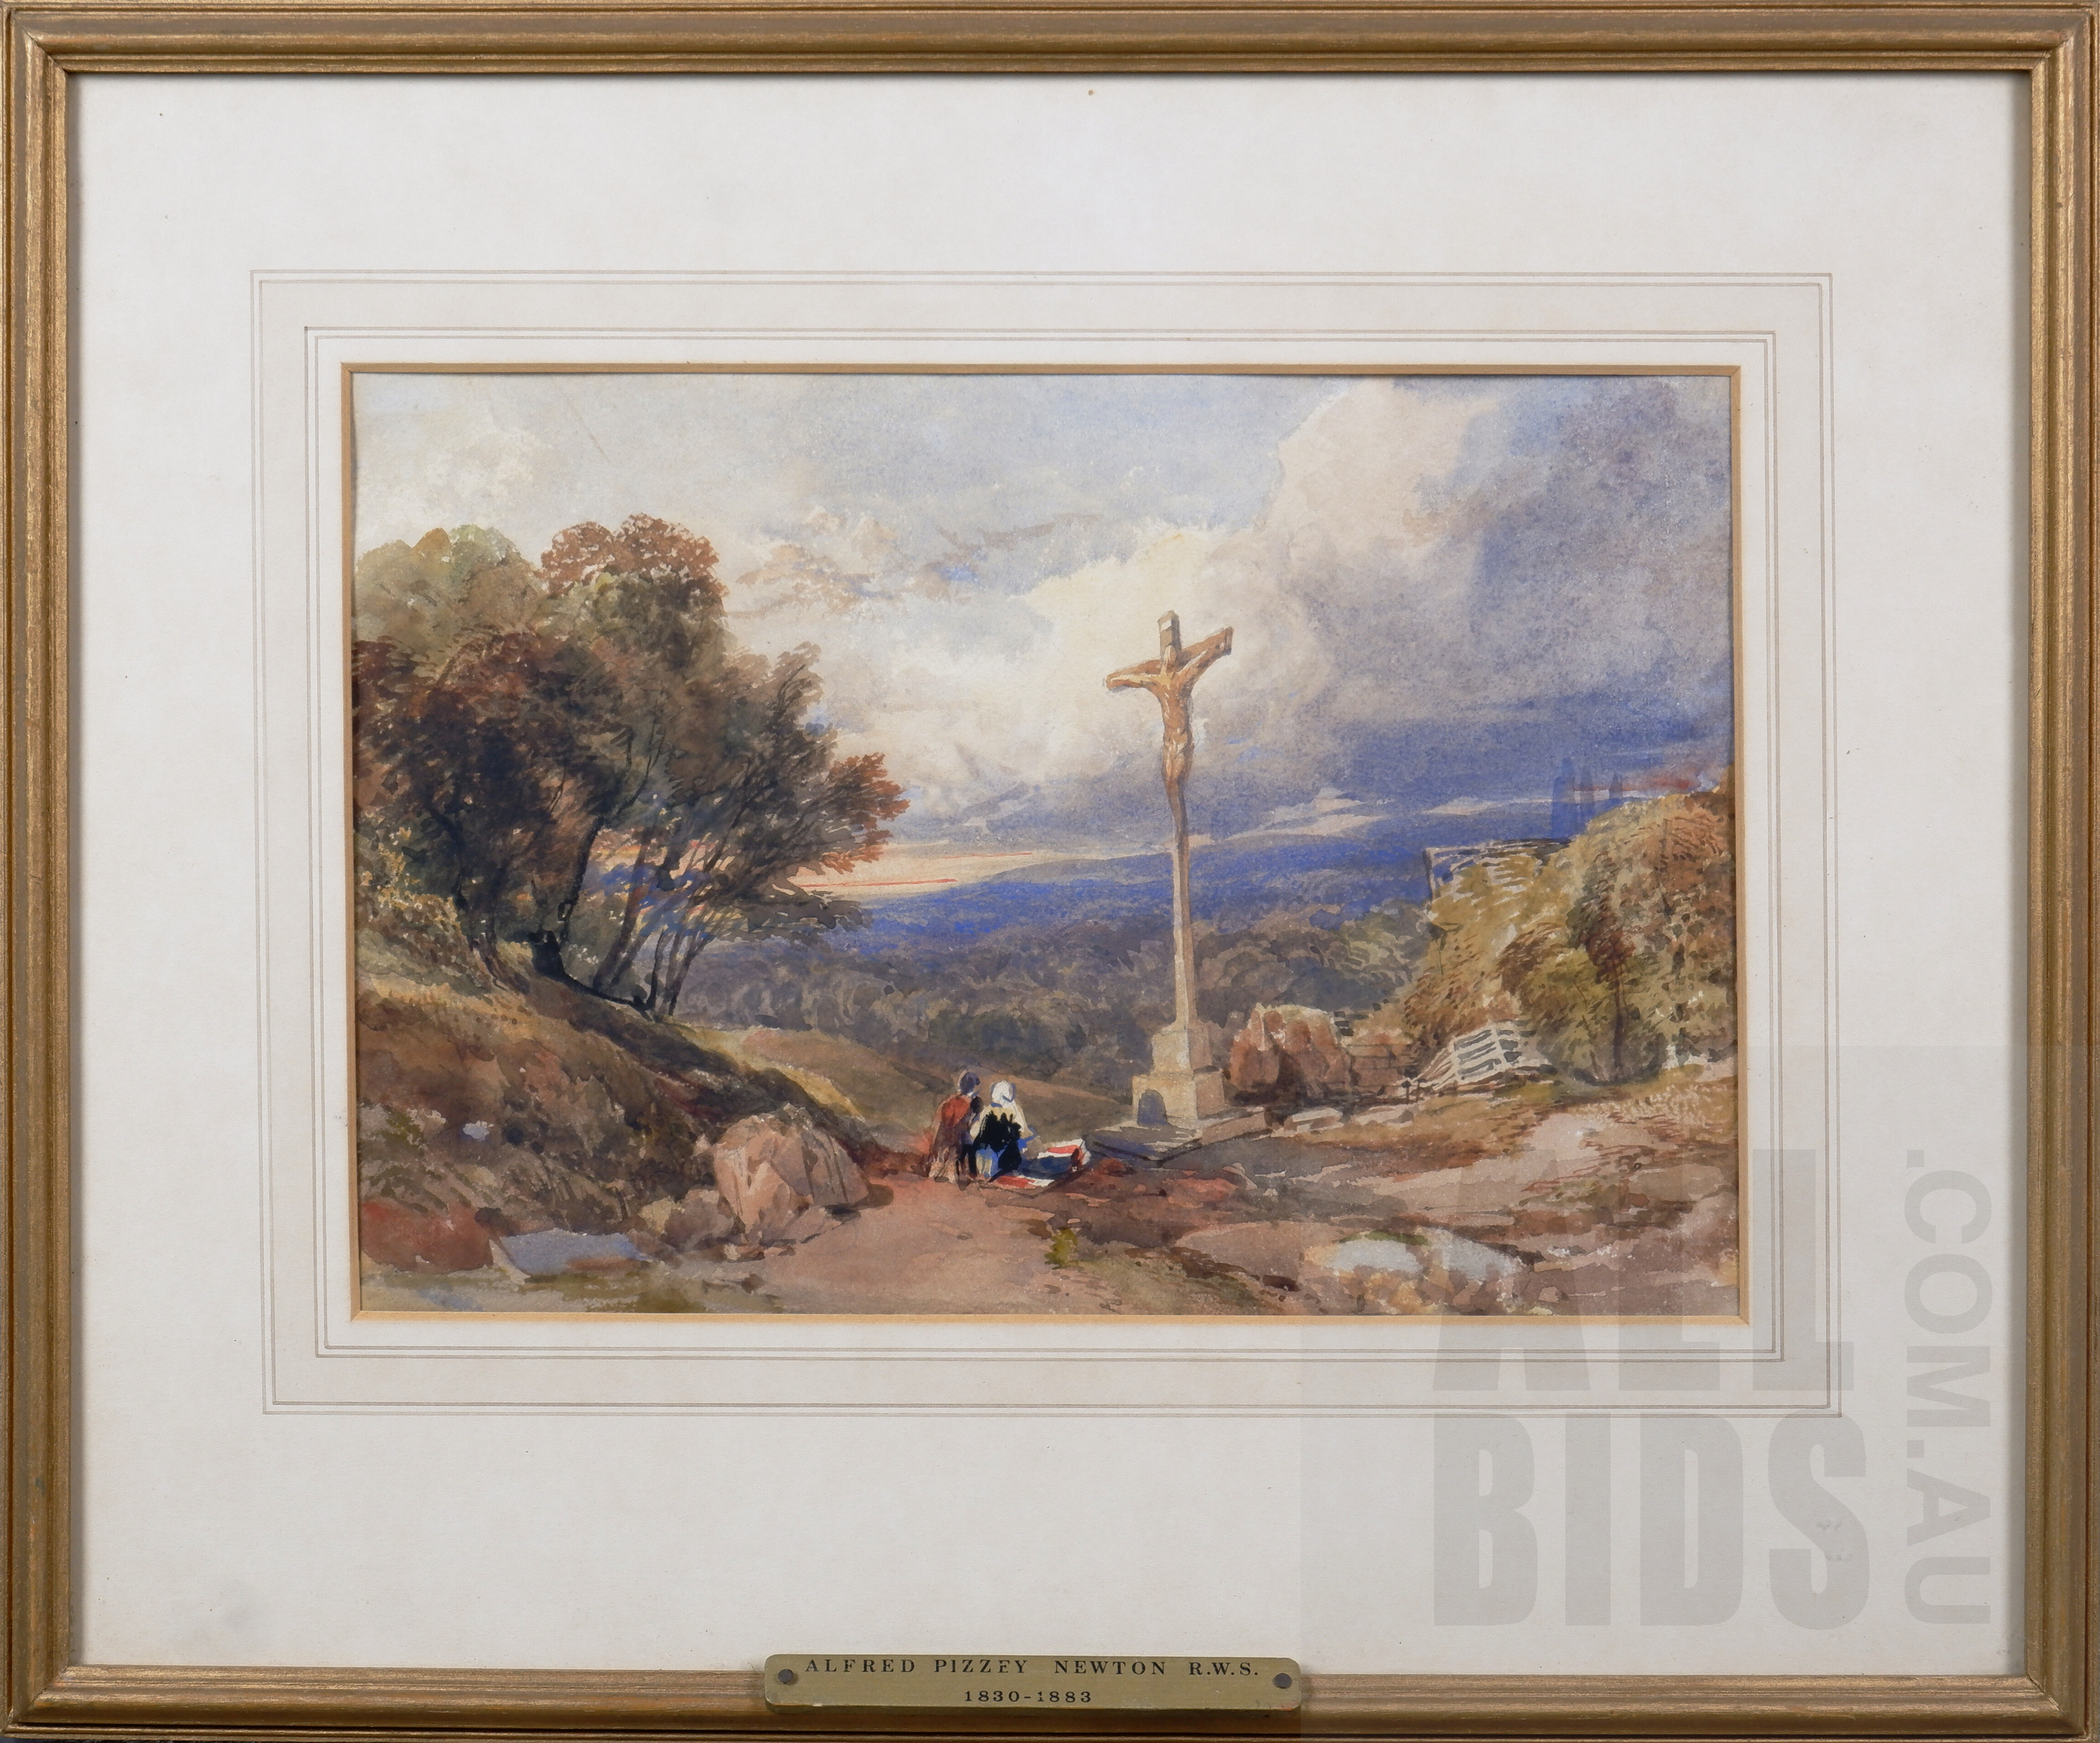 'Alfred Pizzey Newton (1830-1883), A Woody Landscape with Figures by a Cross, Pencil and Coloured Washes, 19 x 29 cm'